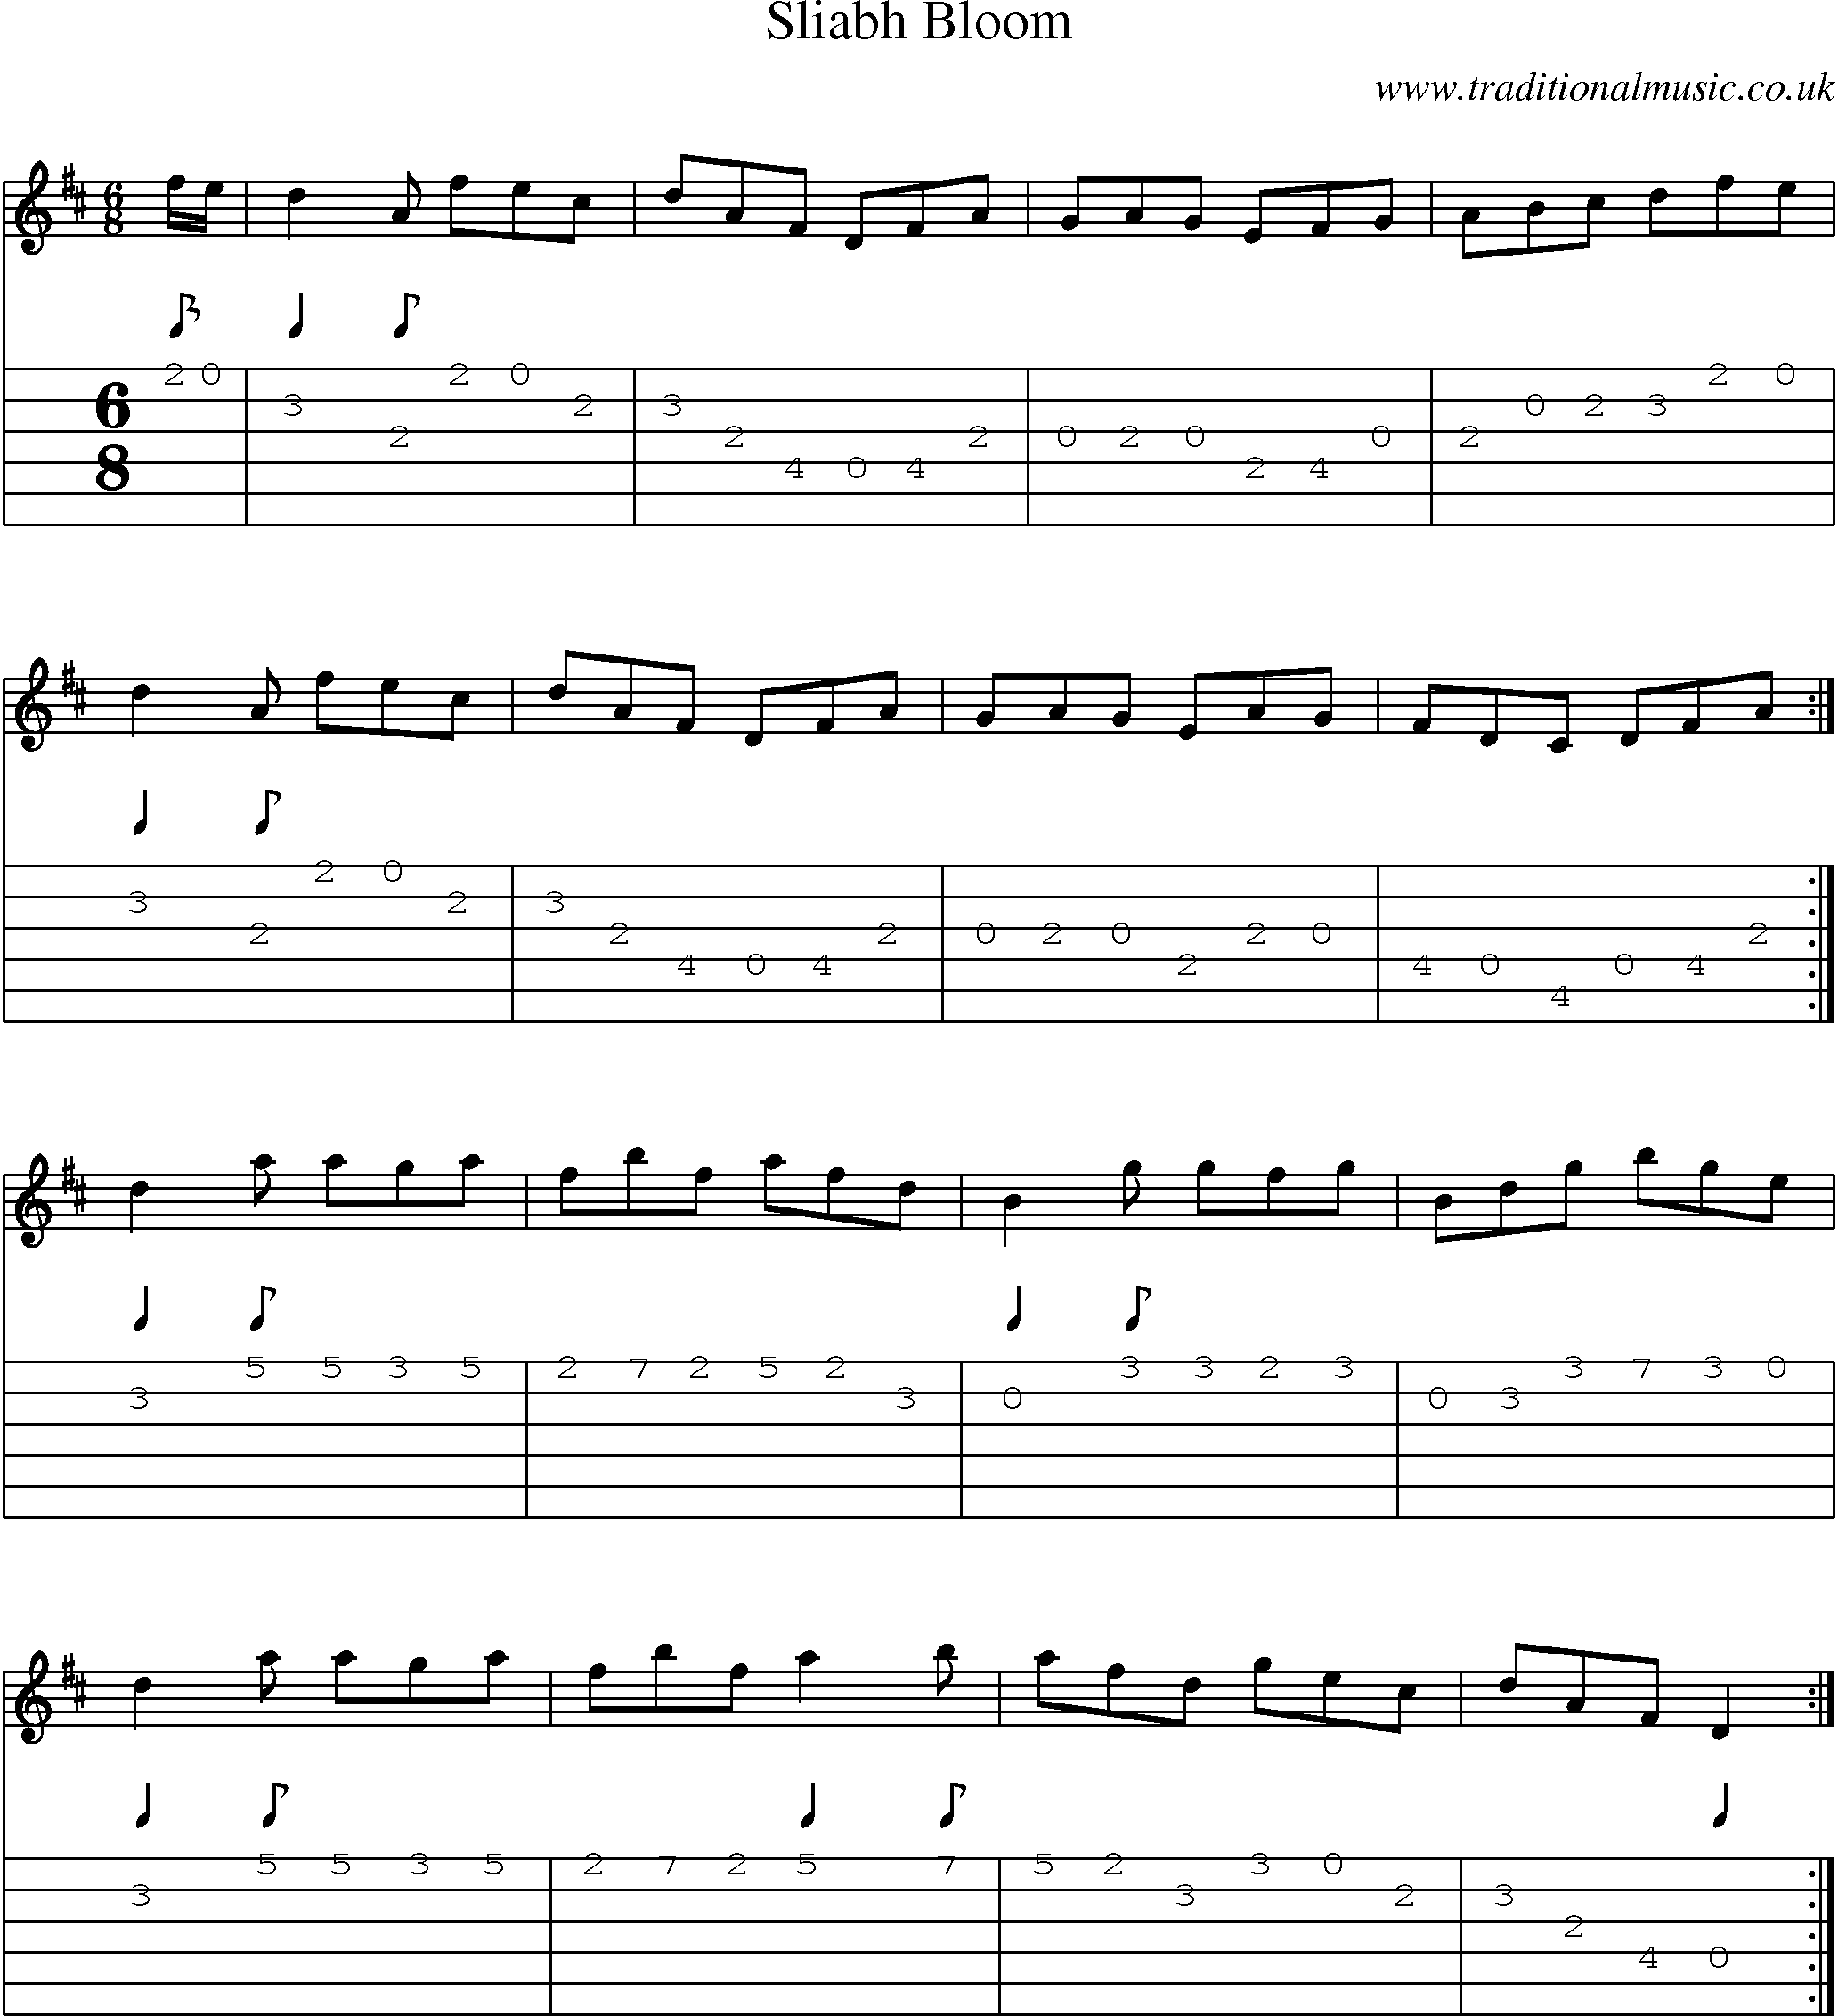 Music Score and Guitar Tabs for Sliabh Bloom